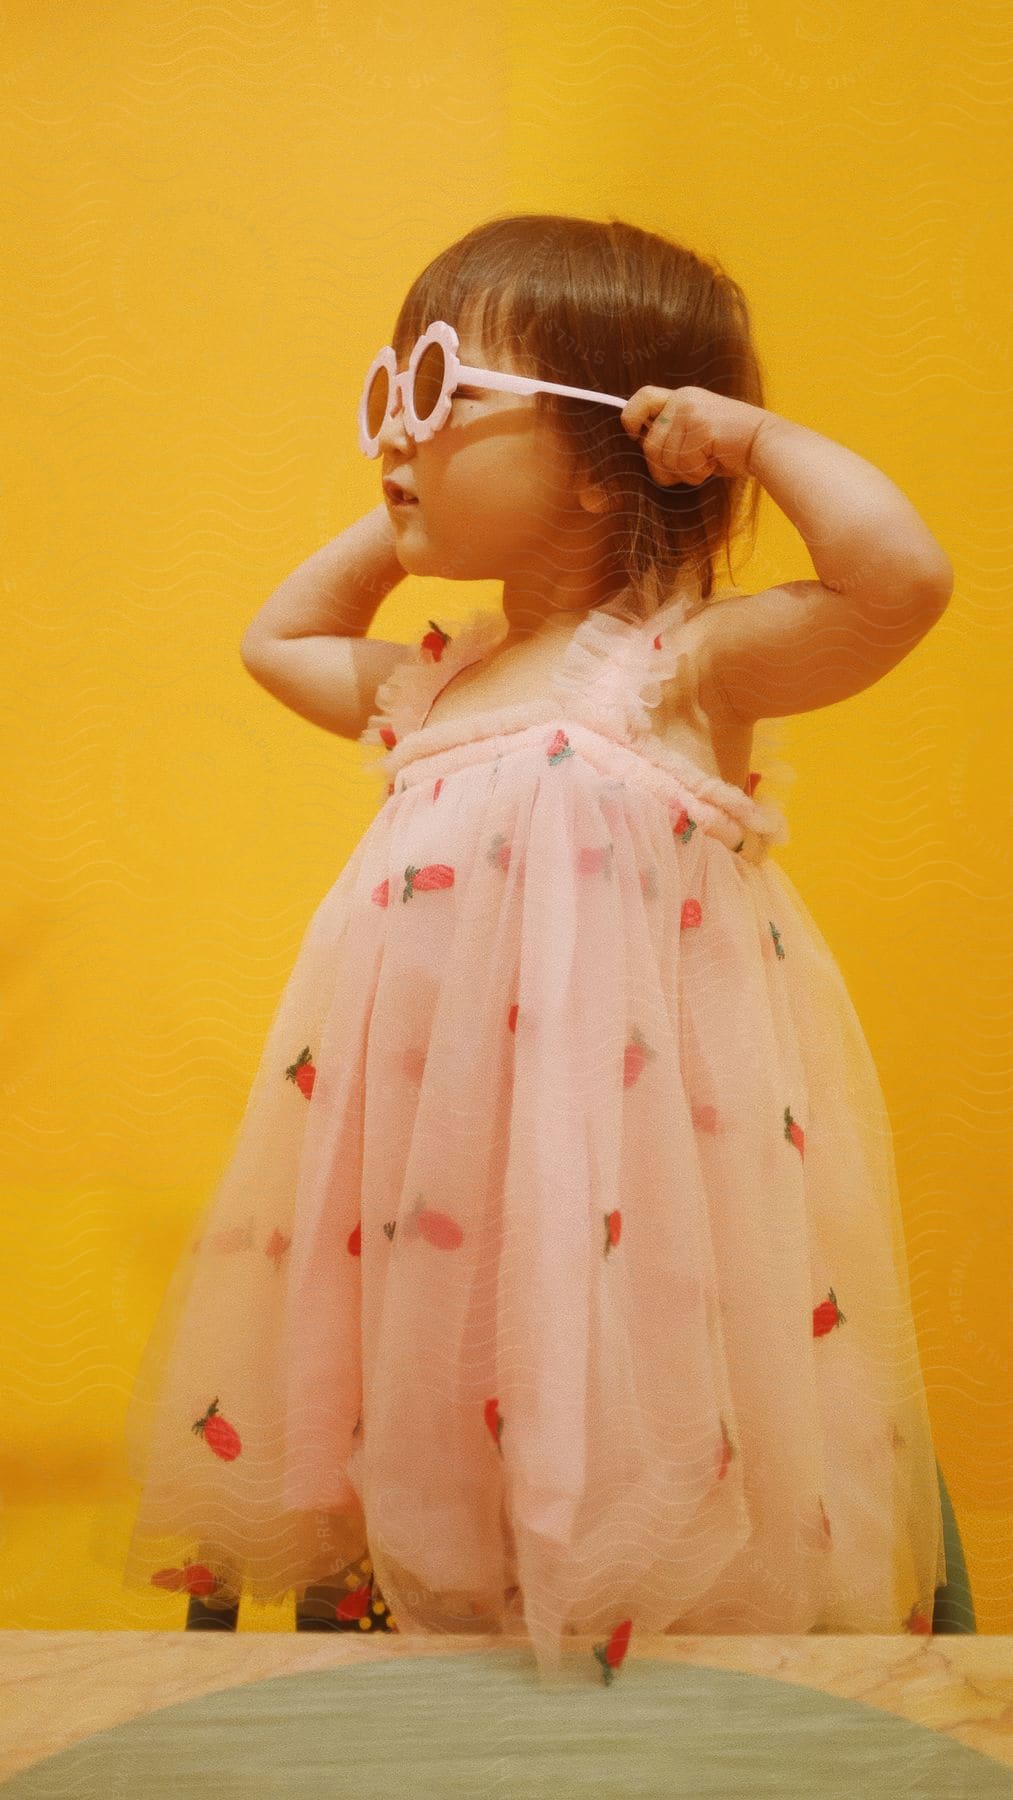 Little girl in a strawberry print dress with her hands in flowered sunglasses on a yellow background.